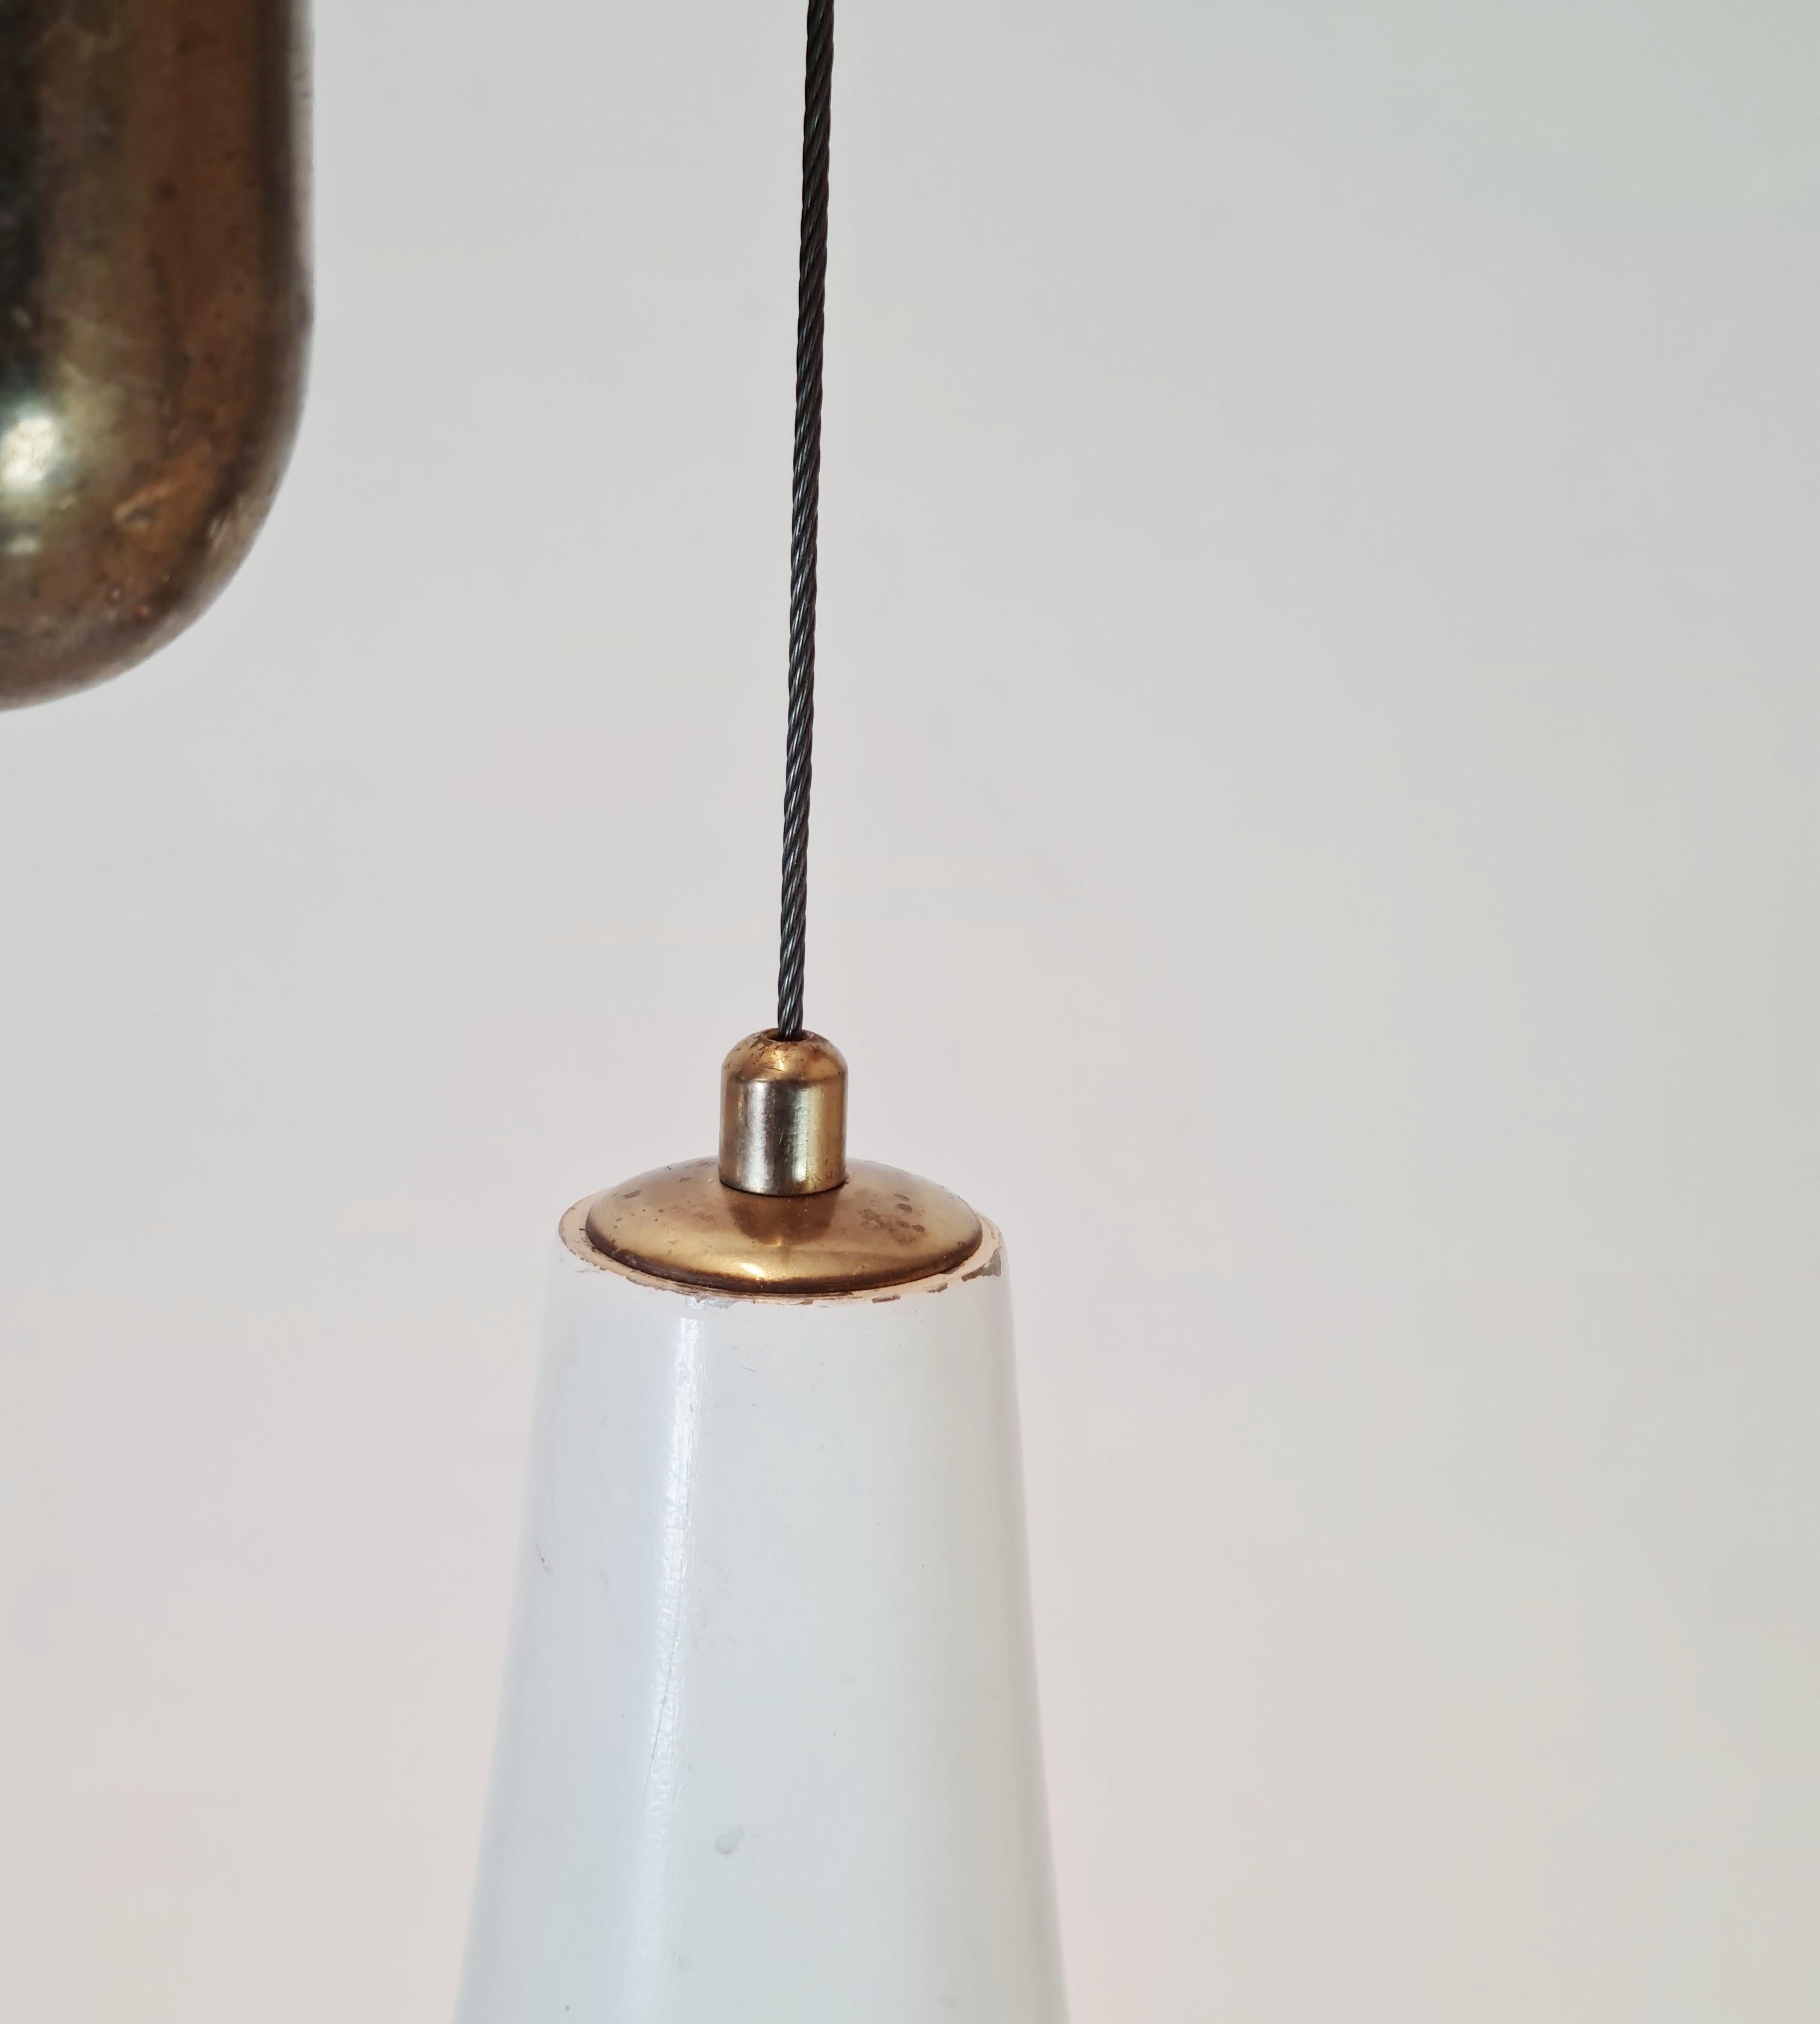 Finnish Paavo Tynell Adjustable Ceiling Lamp Model 1965, Taito 1950s For Sale